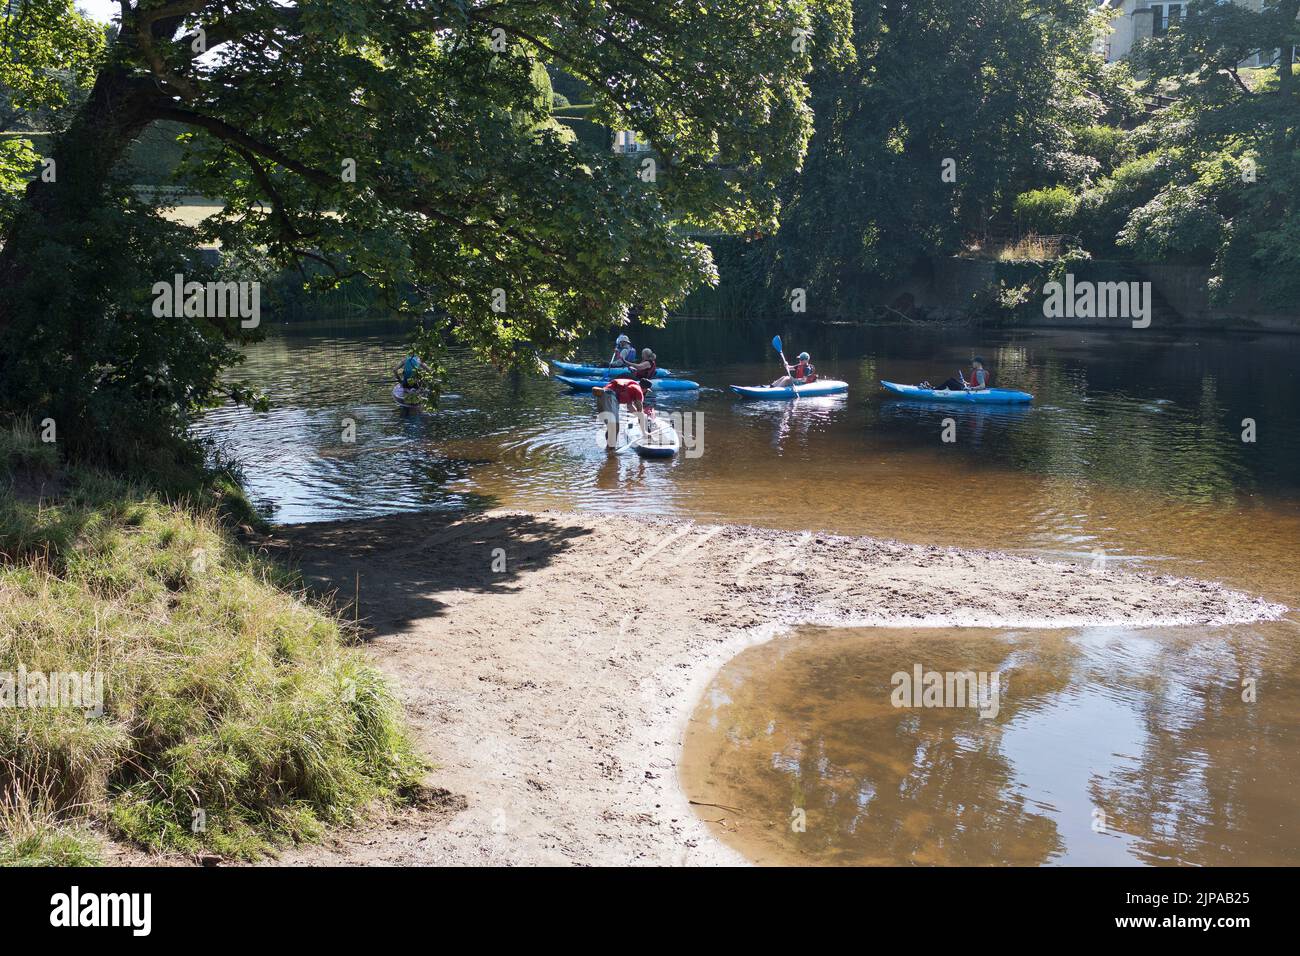 dh River Wharfe WETHERBY WEST YORKSHIRE Impara a paddle paddleboards kayak canottaggio Inghilterra uk Foto Stock